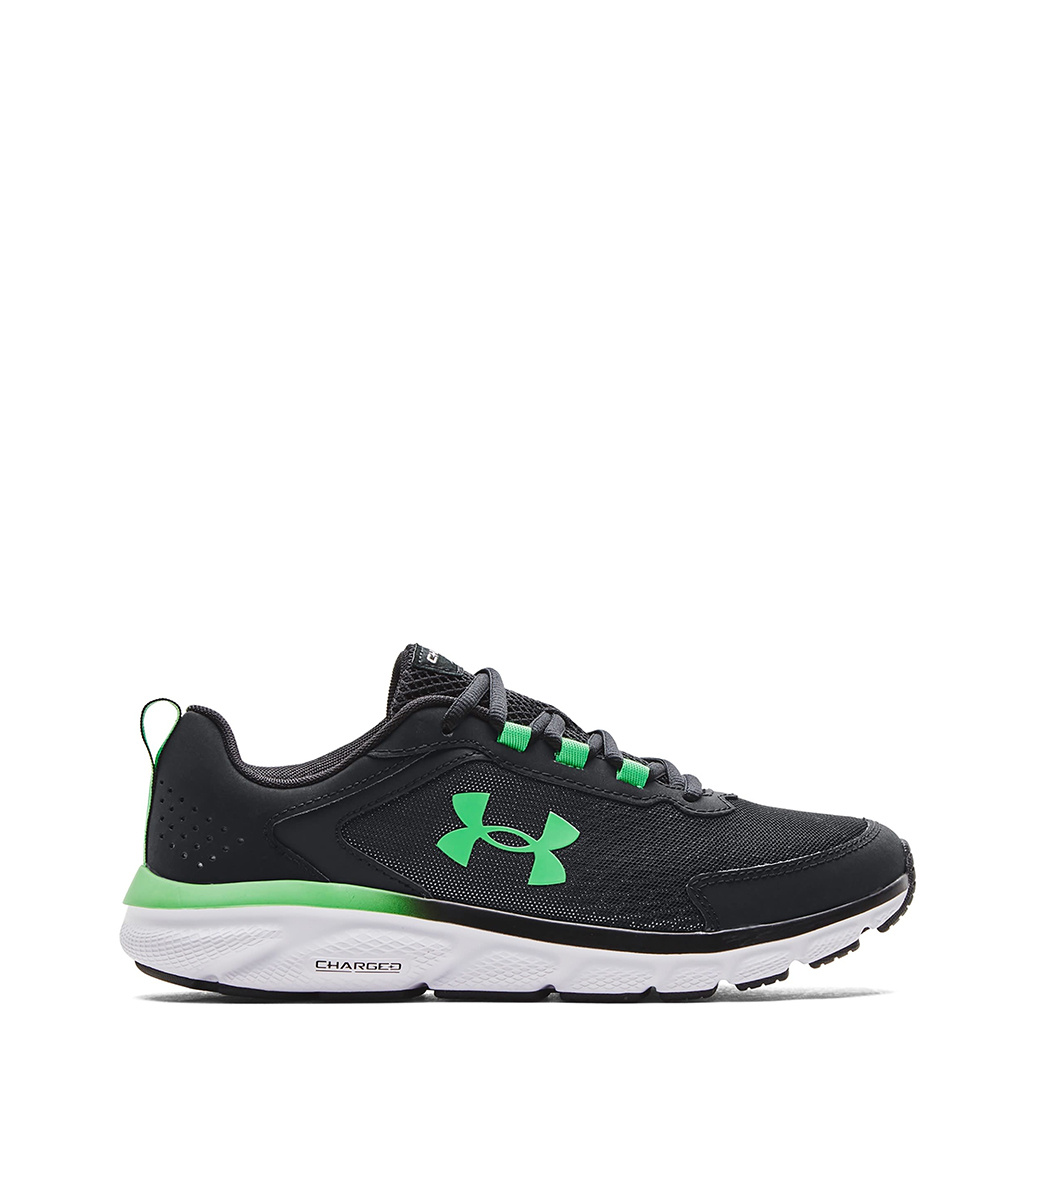 Under Armour Charged Assert 9 Running Shoe - Men's - Free Shipping